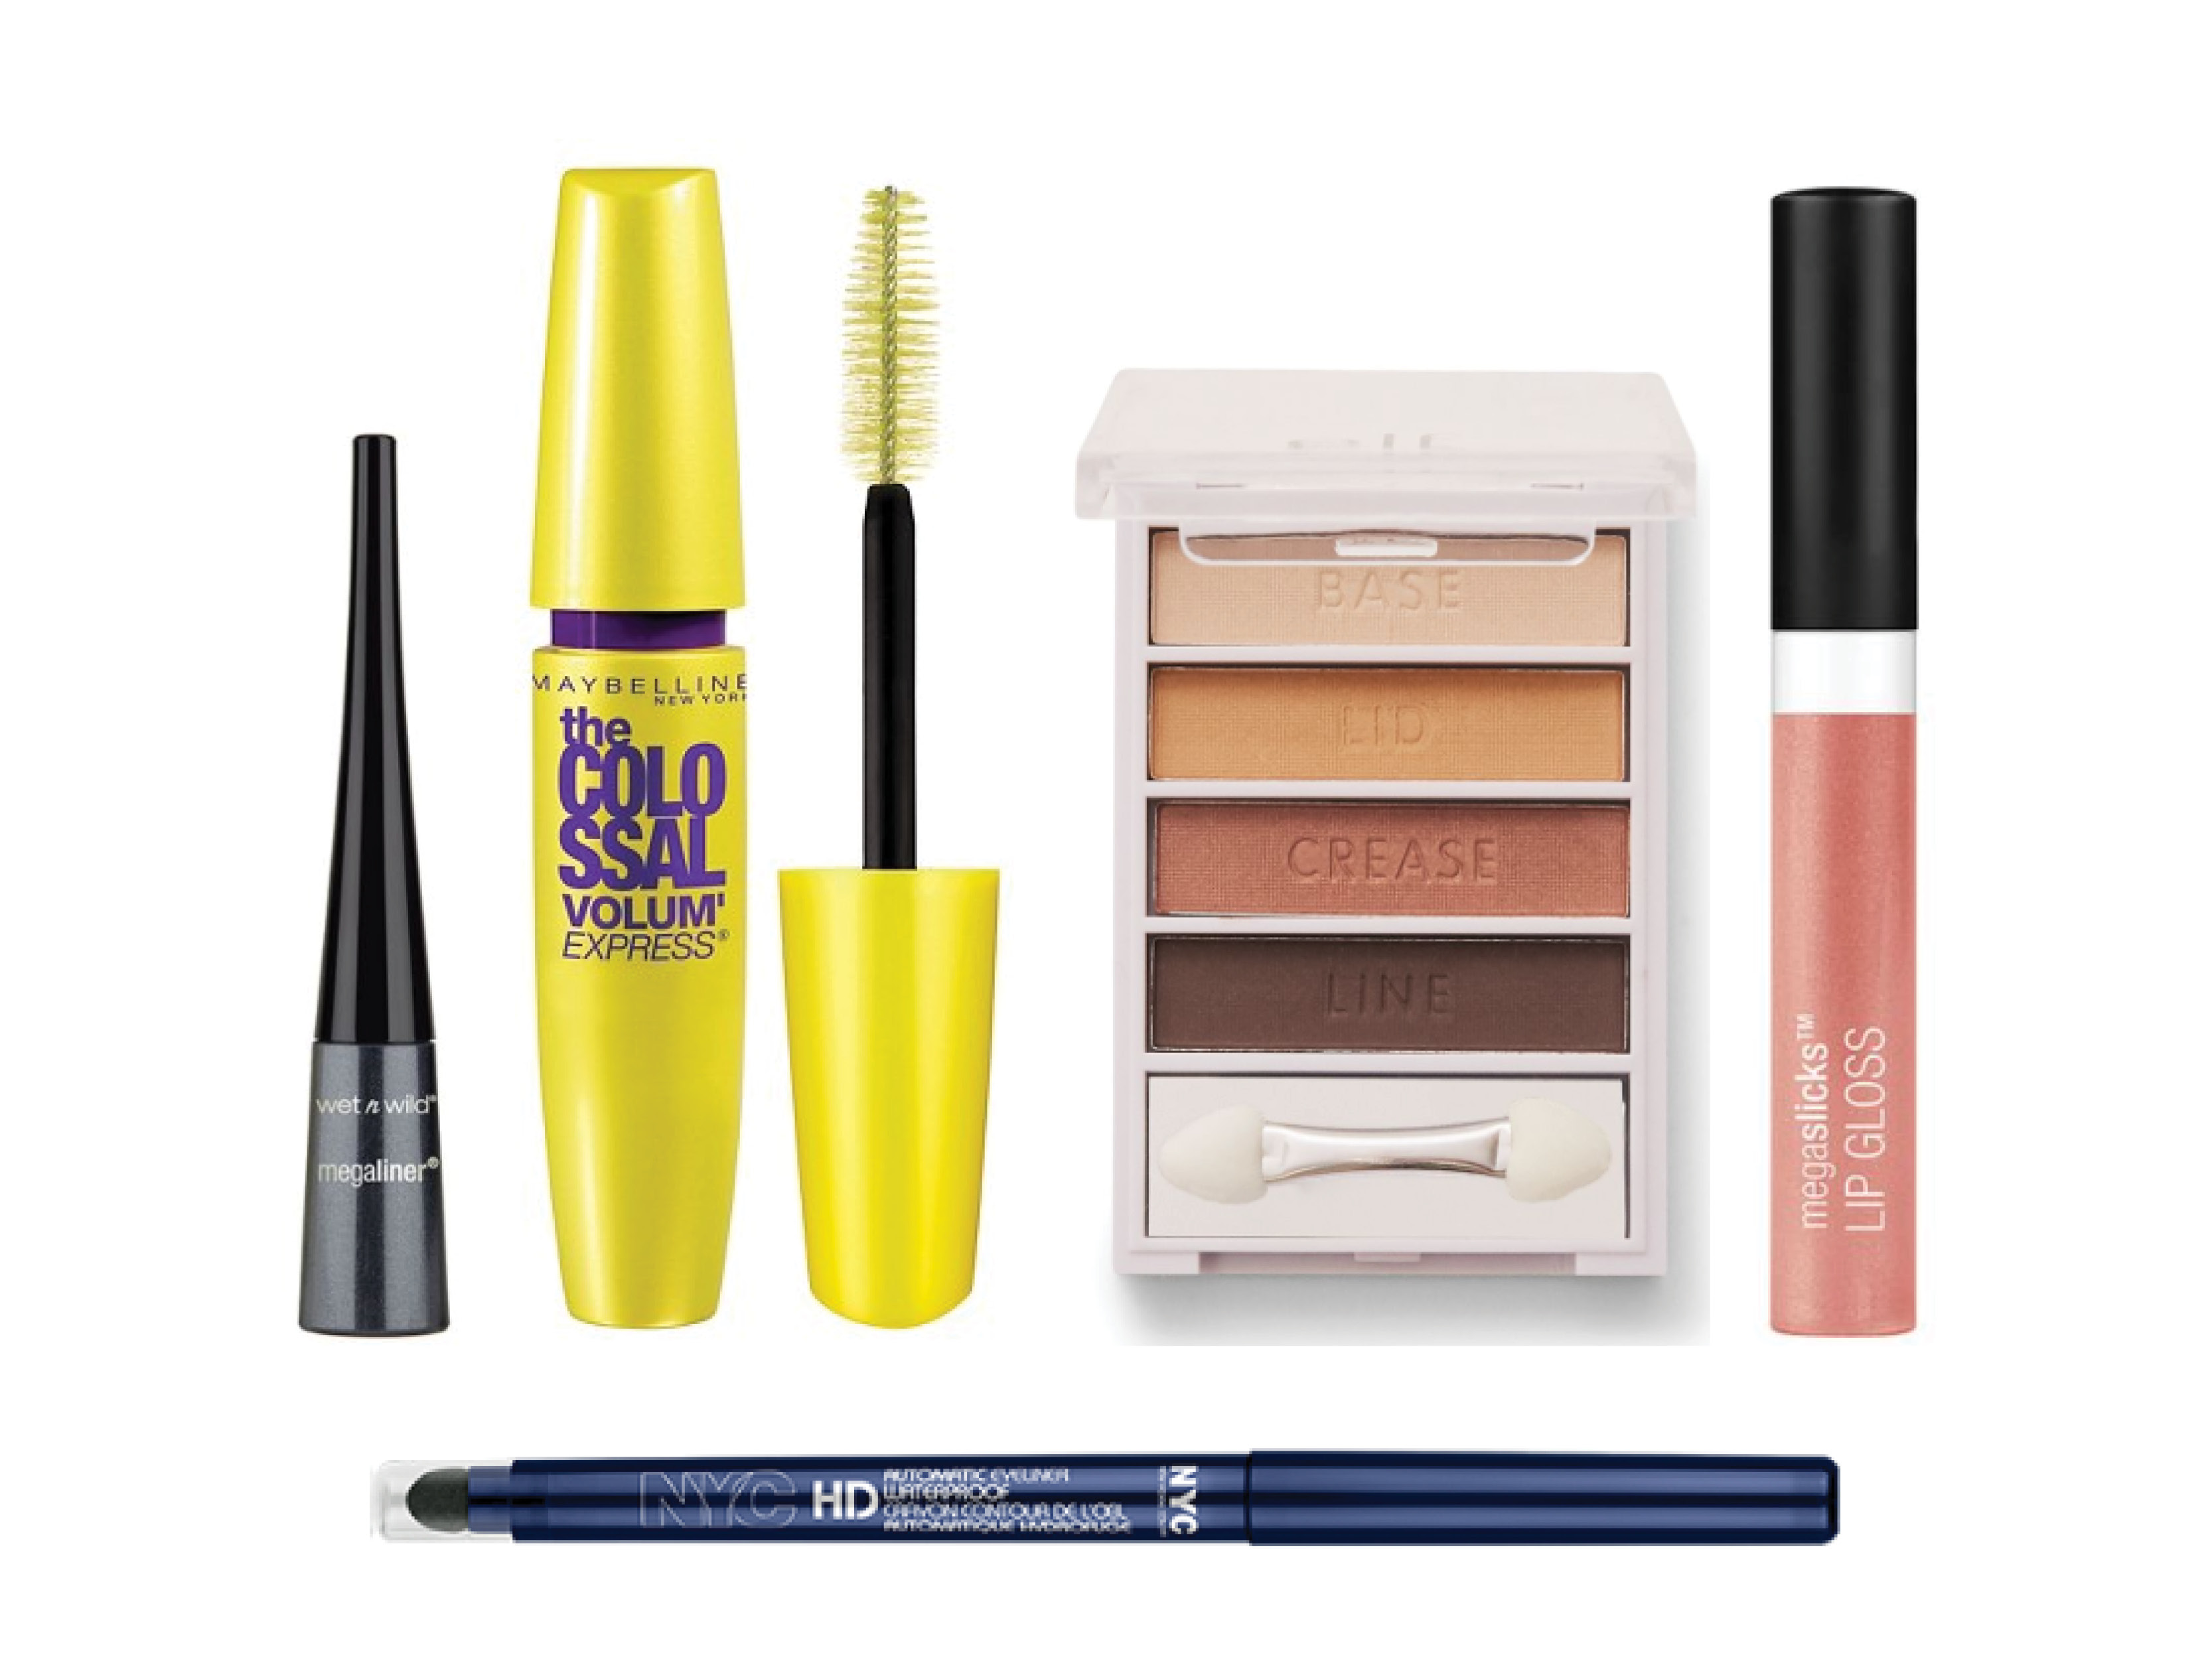 5 Drugstore Makeup Products I Can’t Live Without